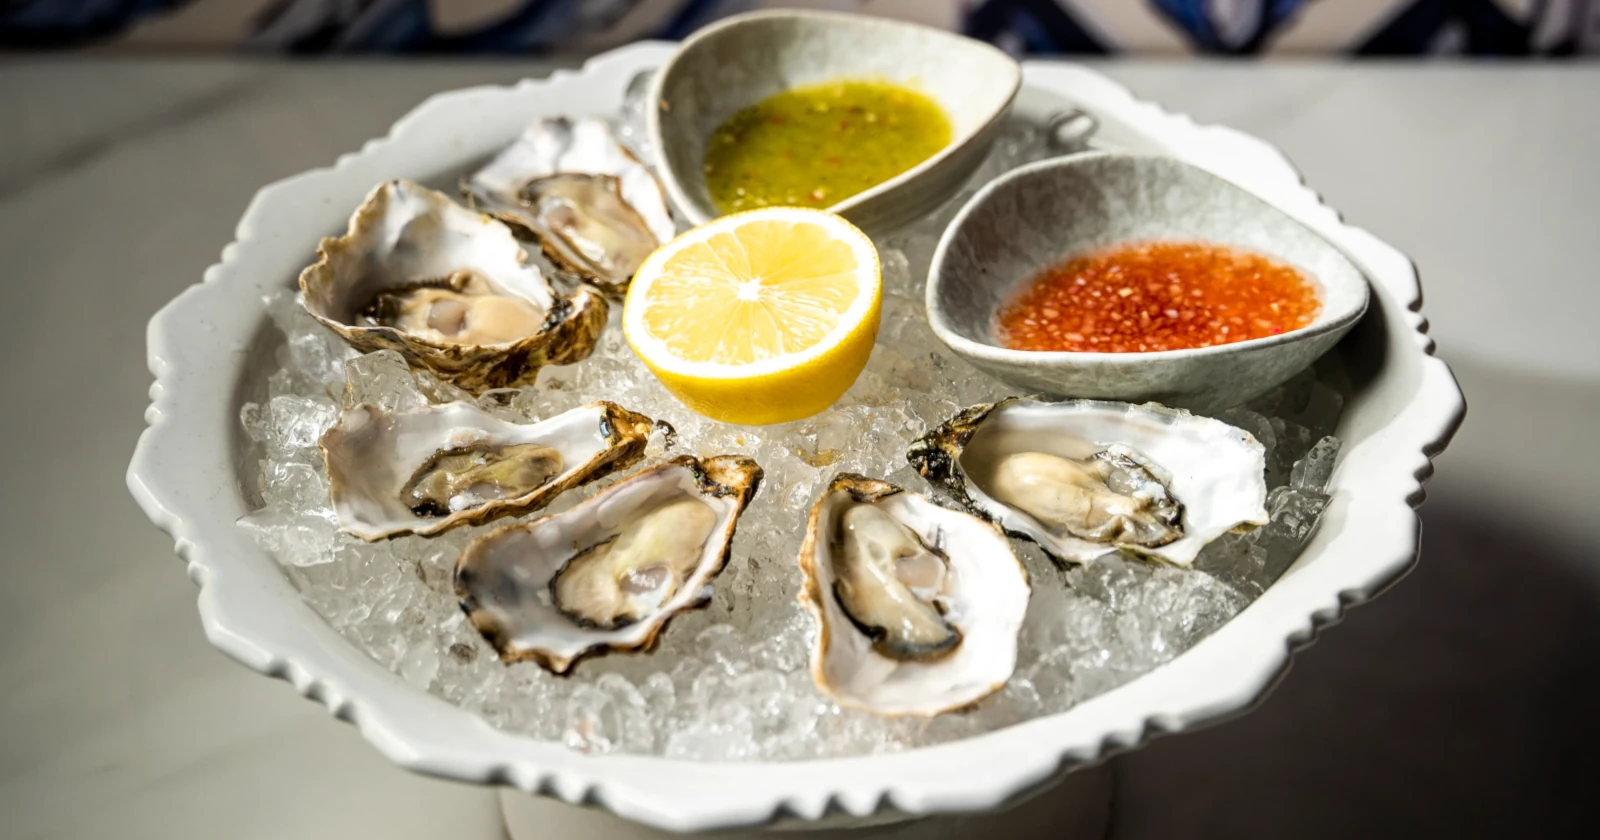 Amazing oysters with citrus at Pastel Rooftop bar in Bangkok.